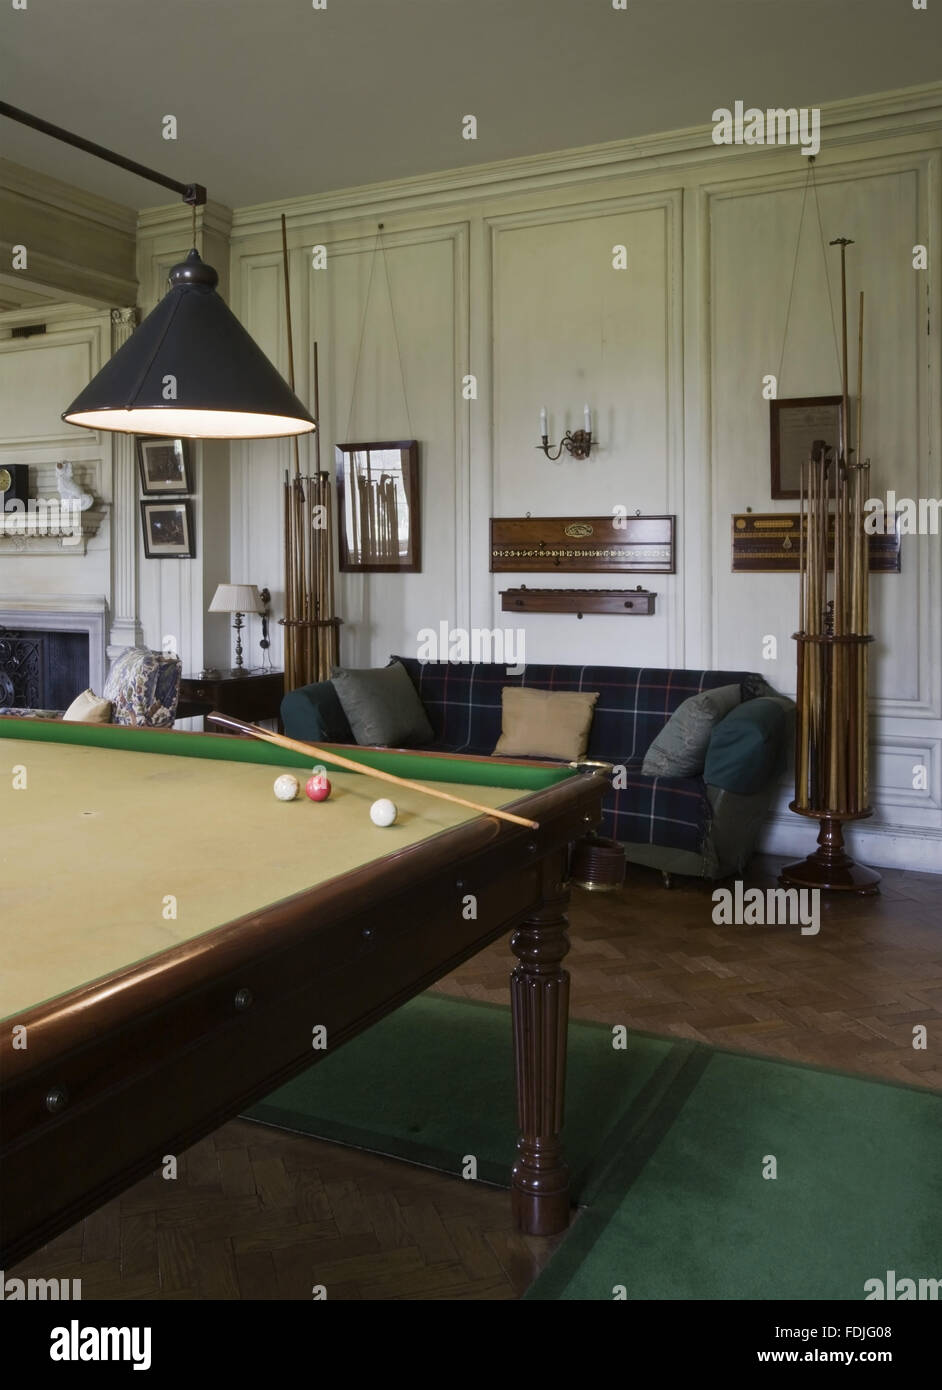 The Billiard Room at Dunham Massey, Cheshire. The billiard table was made  by Gillows of Lancaster c.1810. The wooden panelling in the room is of an  eighteenth-century pattern painted a "stone white"